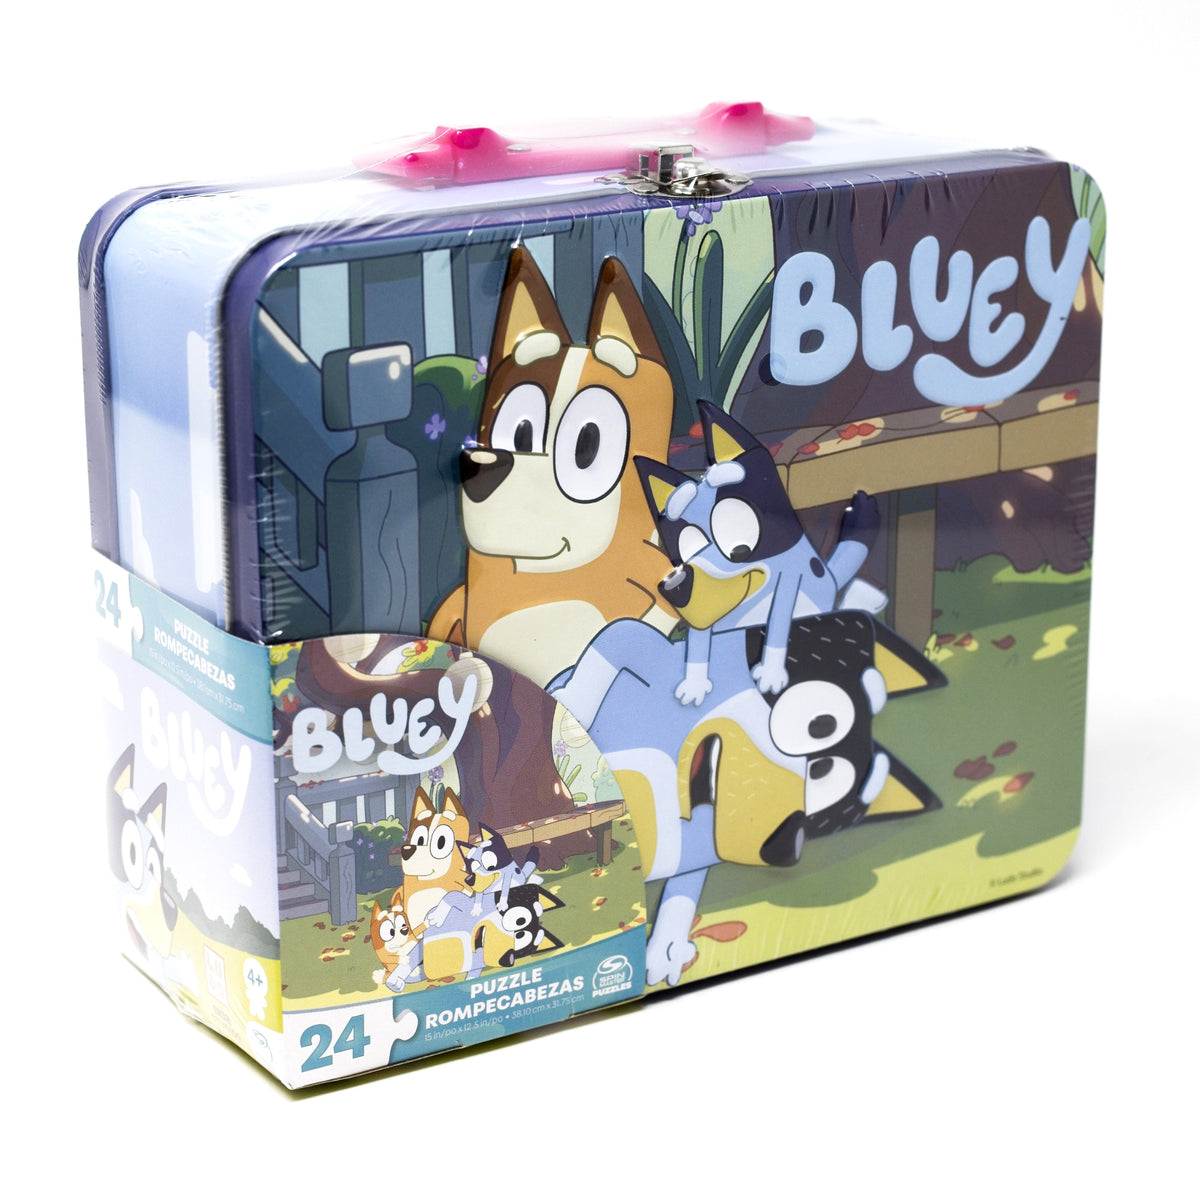 Bluey Tin Lunch Box with 24 Piece Puzzle